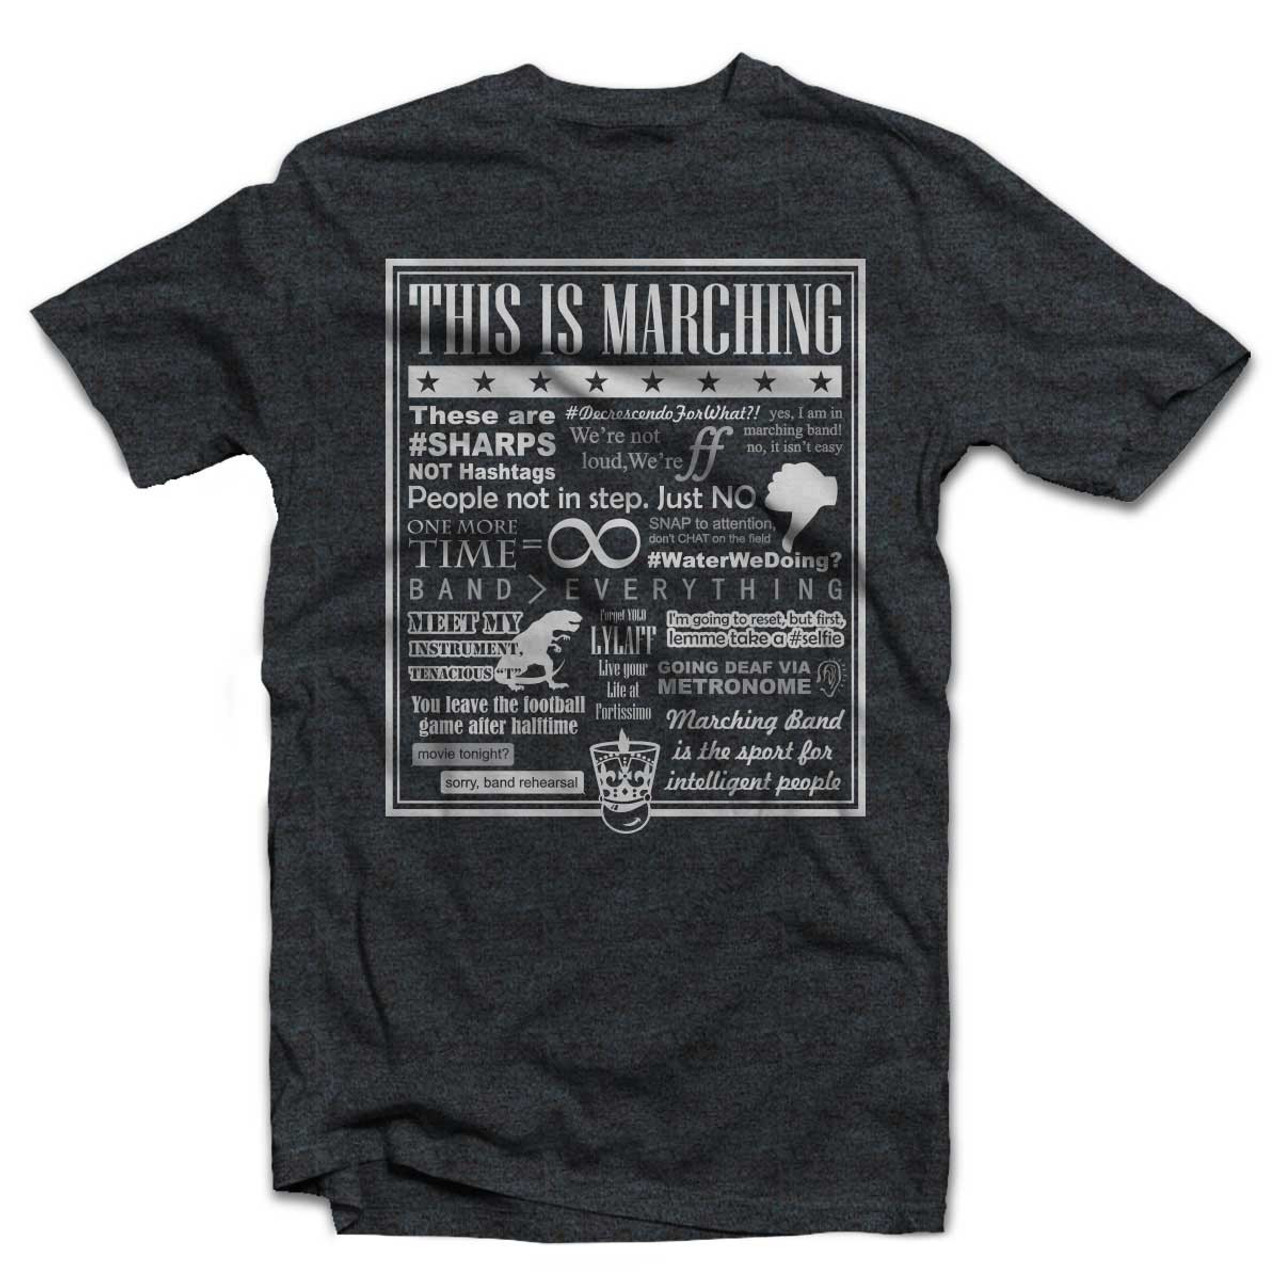 This is Marching T-Shirt